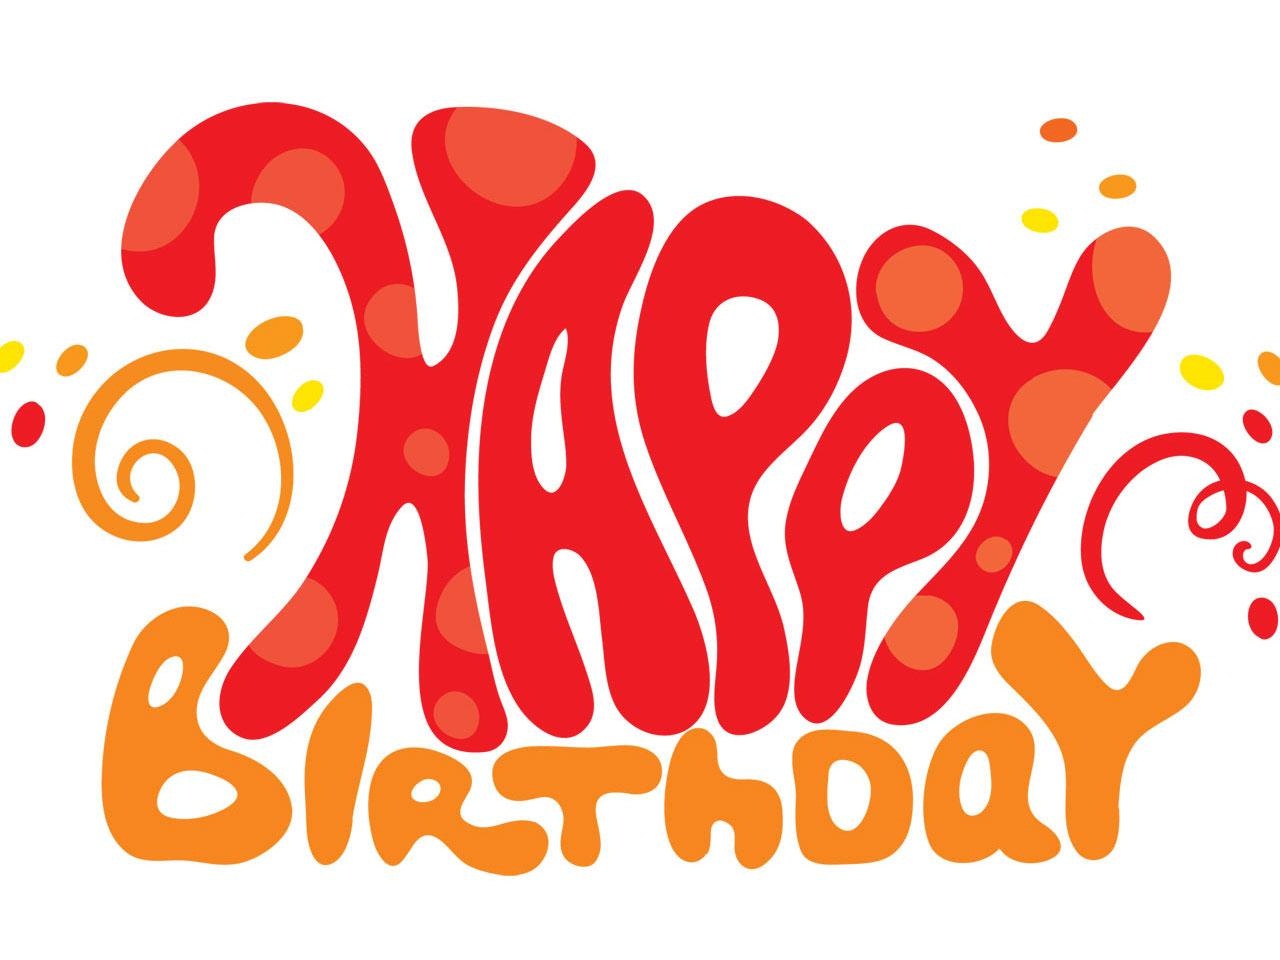 Happy Birthday Cake With Name Edit For Facebook   Clipart Panda   Free